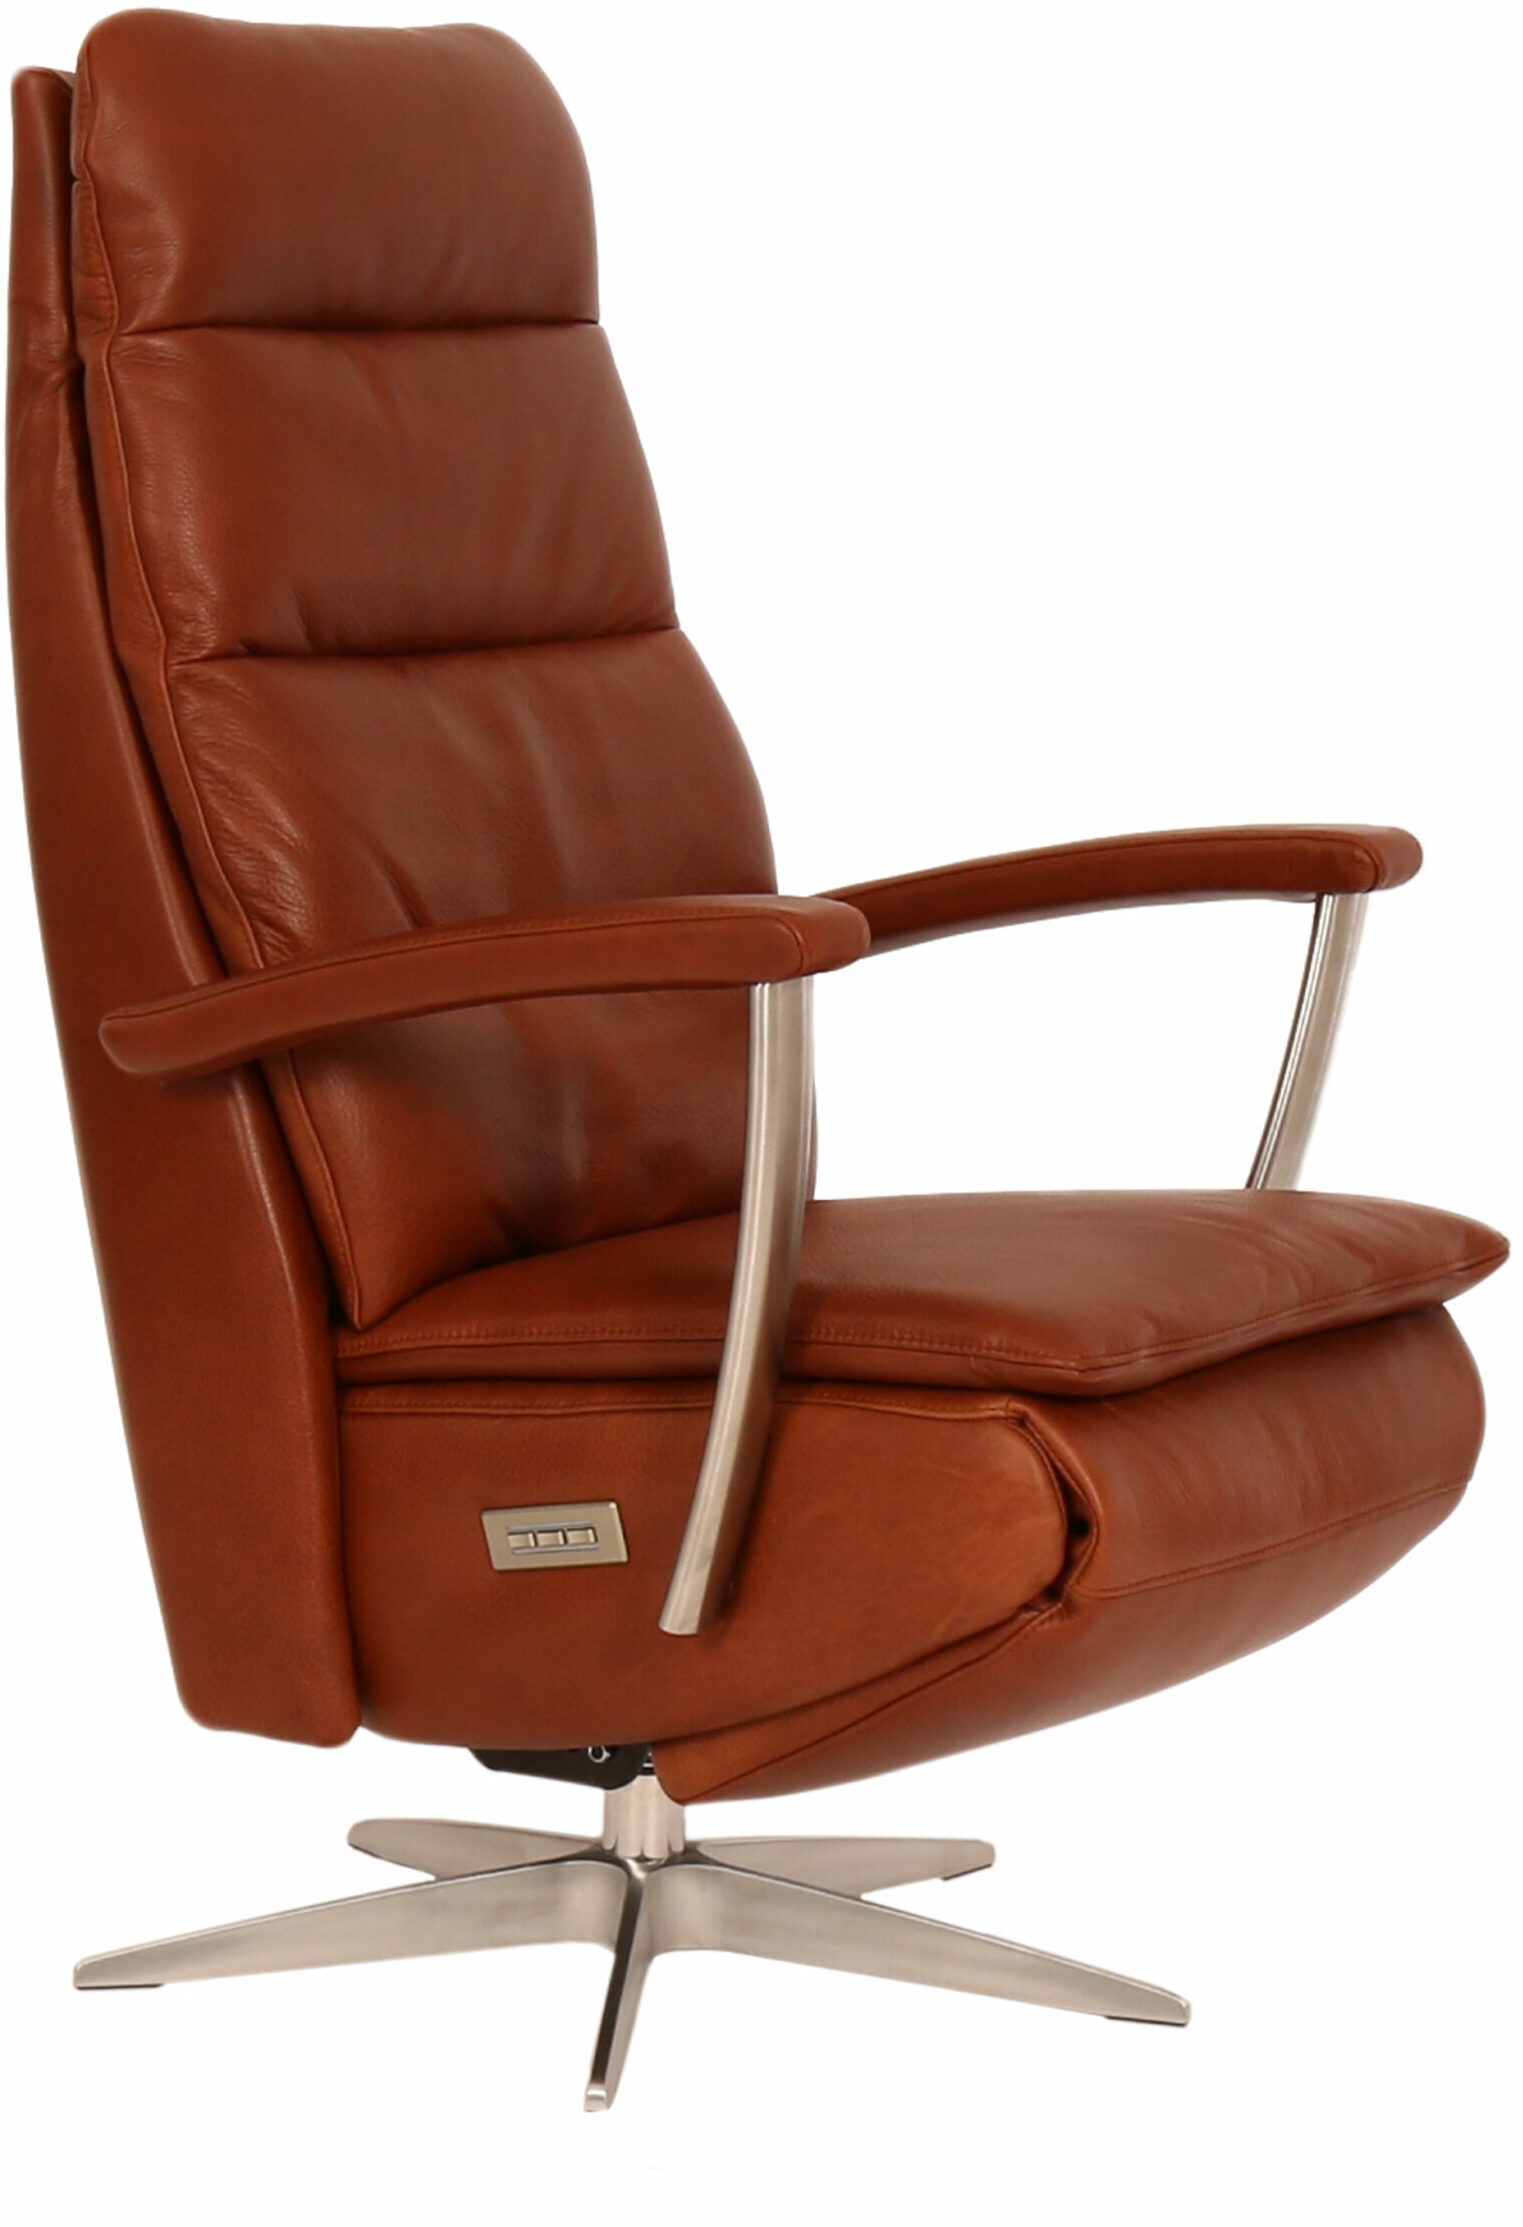 Twinz 234 relaxfauteuil